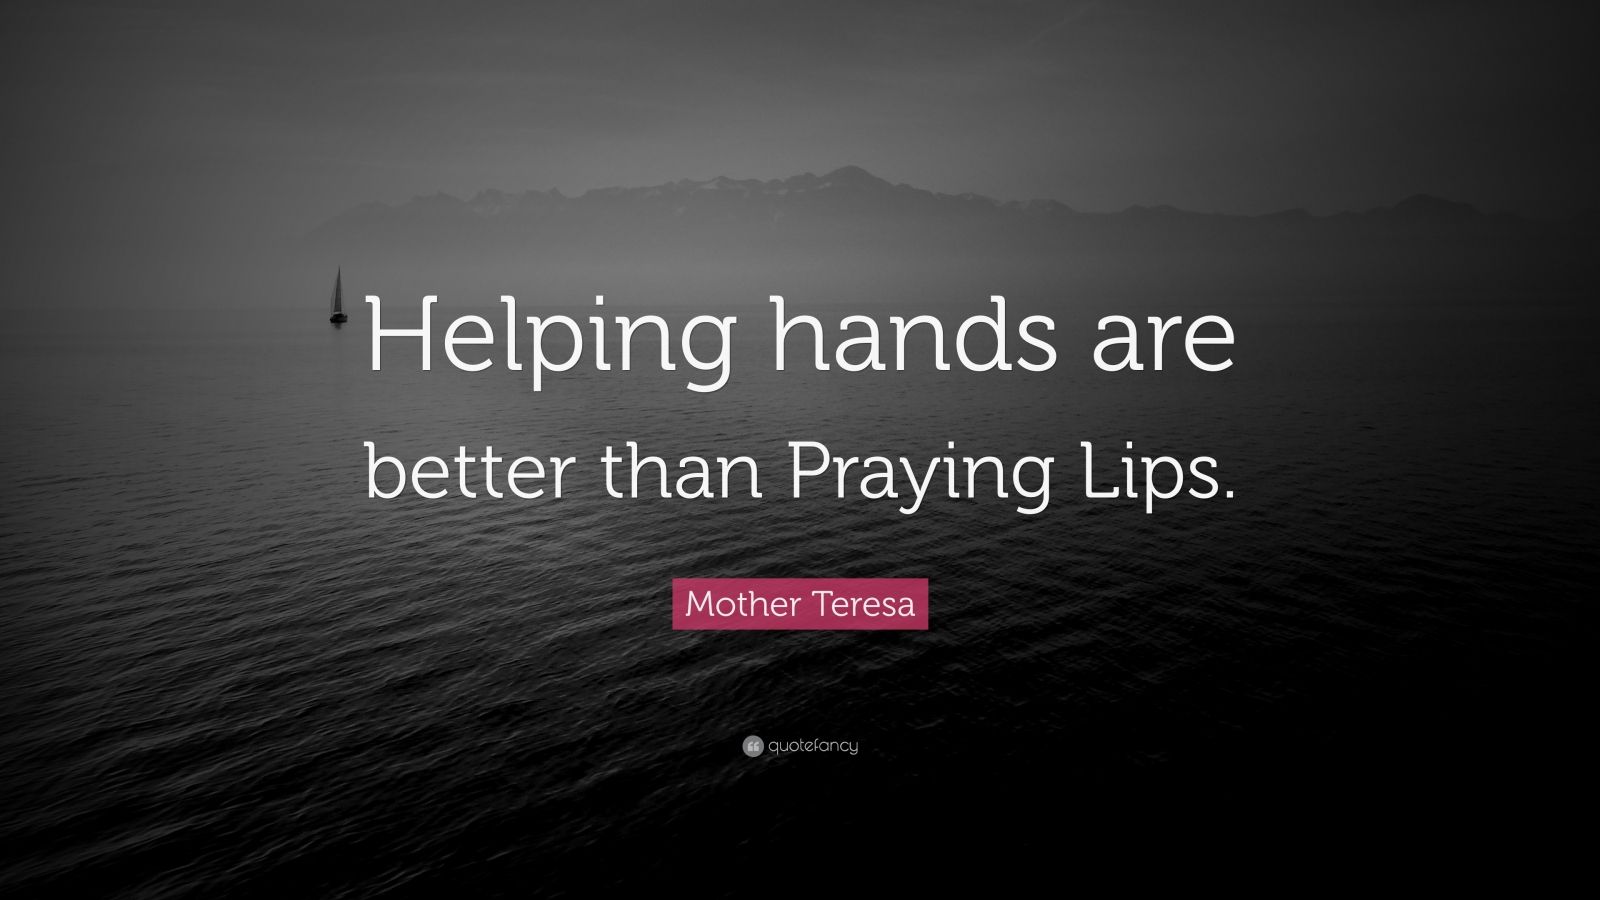 Mother Teresa Quote: “Helping hands are better than Praying Lips.” (12 ...